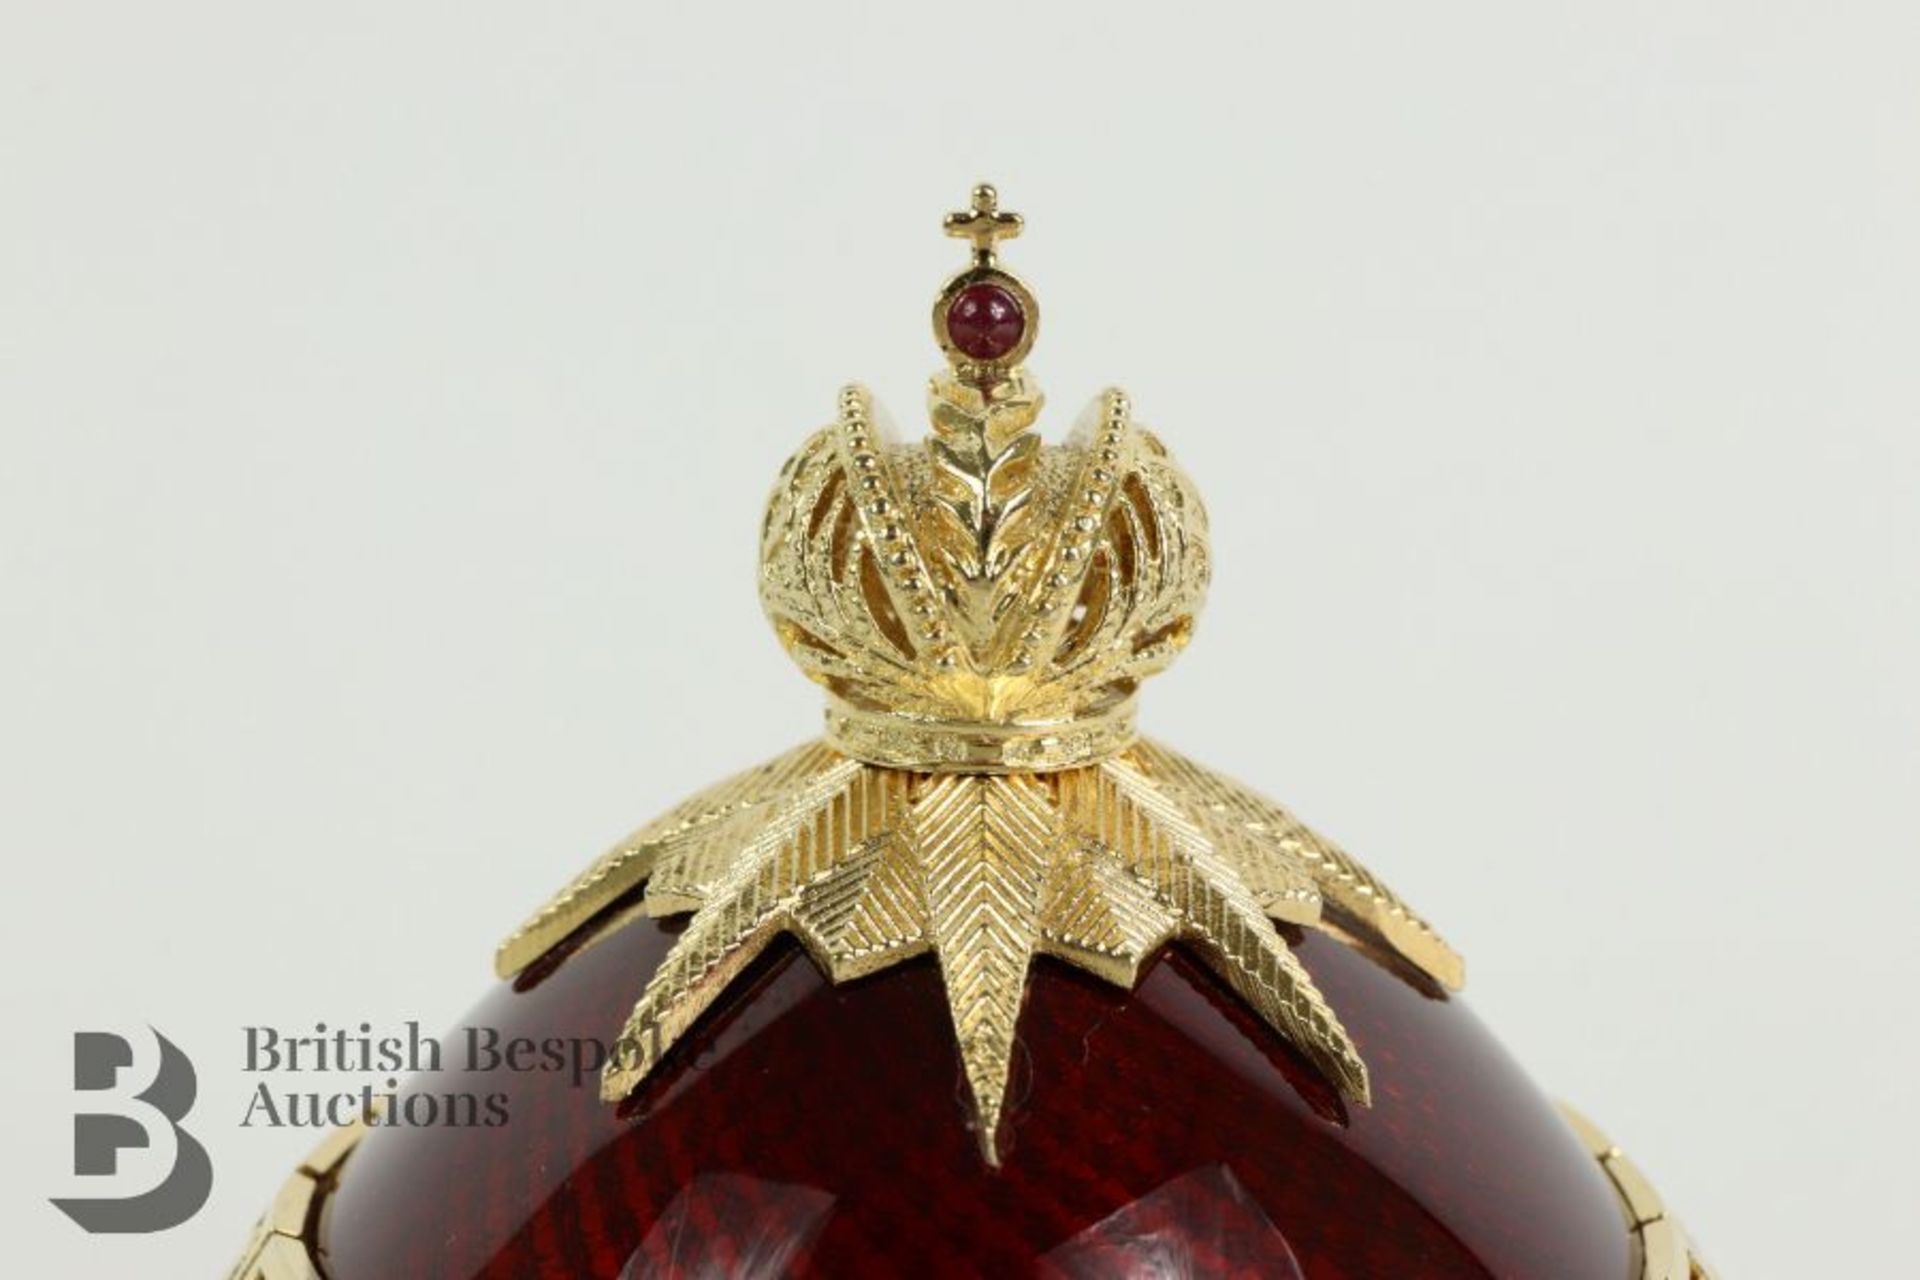 Theo Faberge Anichkov Egg - St Petersburg Collection - Image 31 of 37